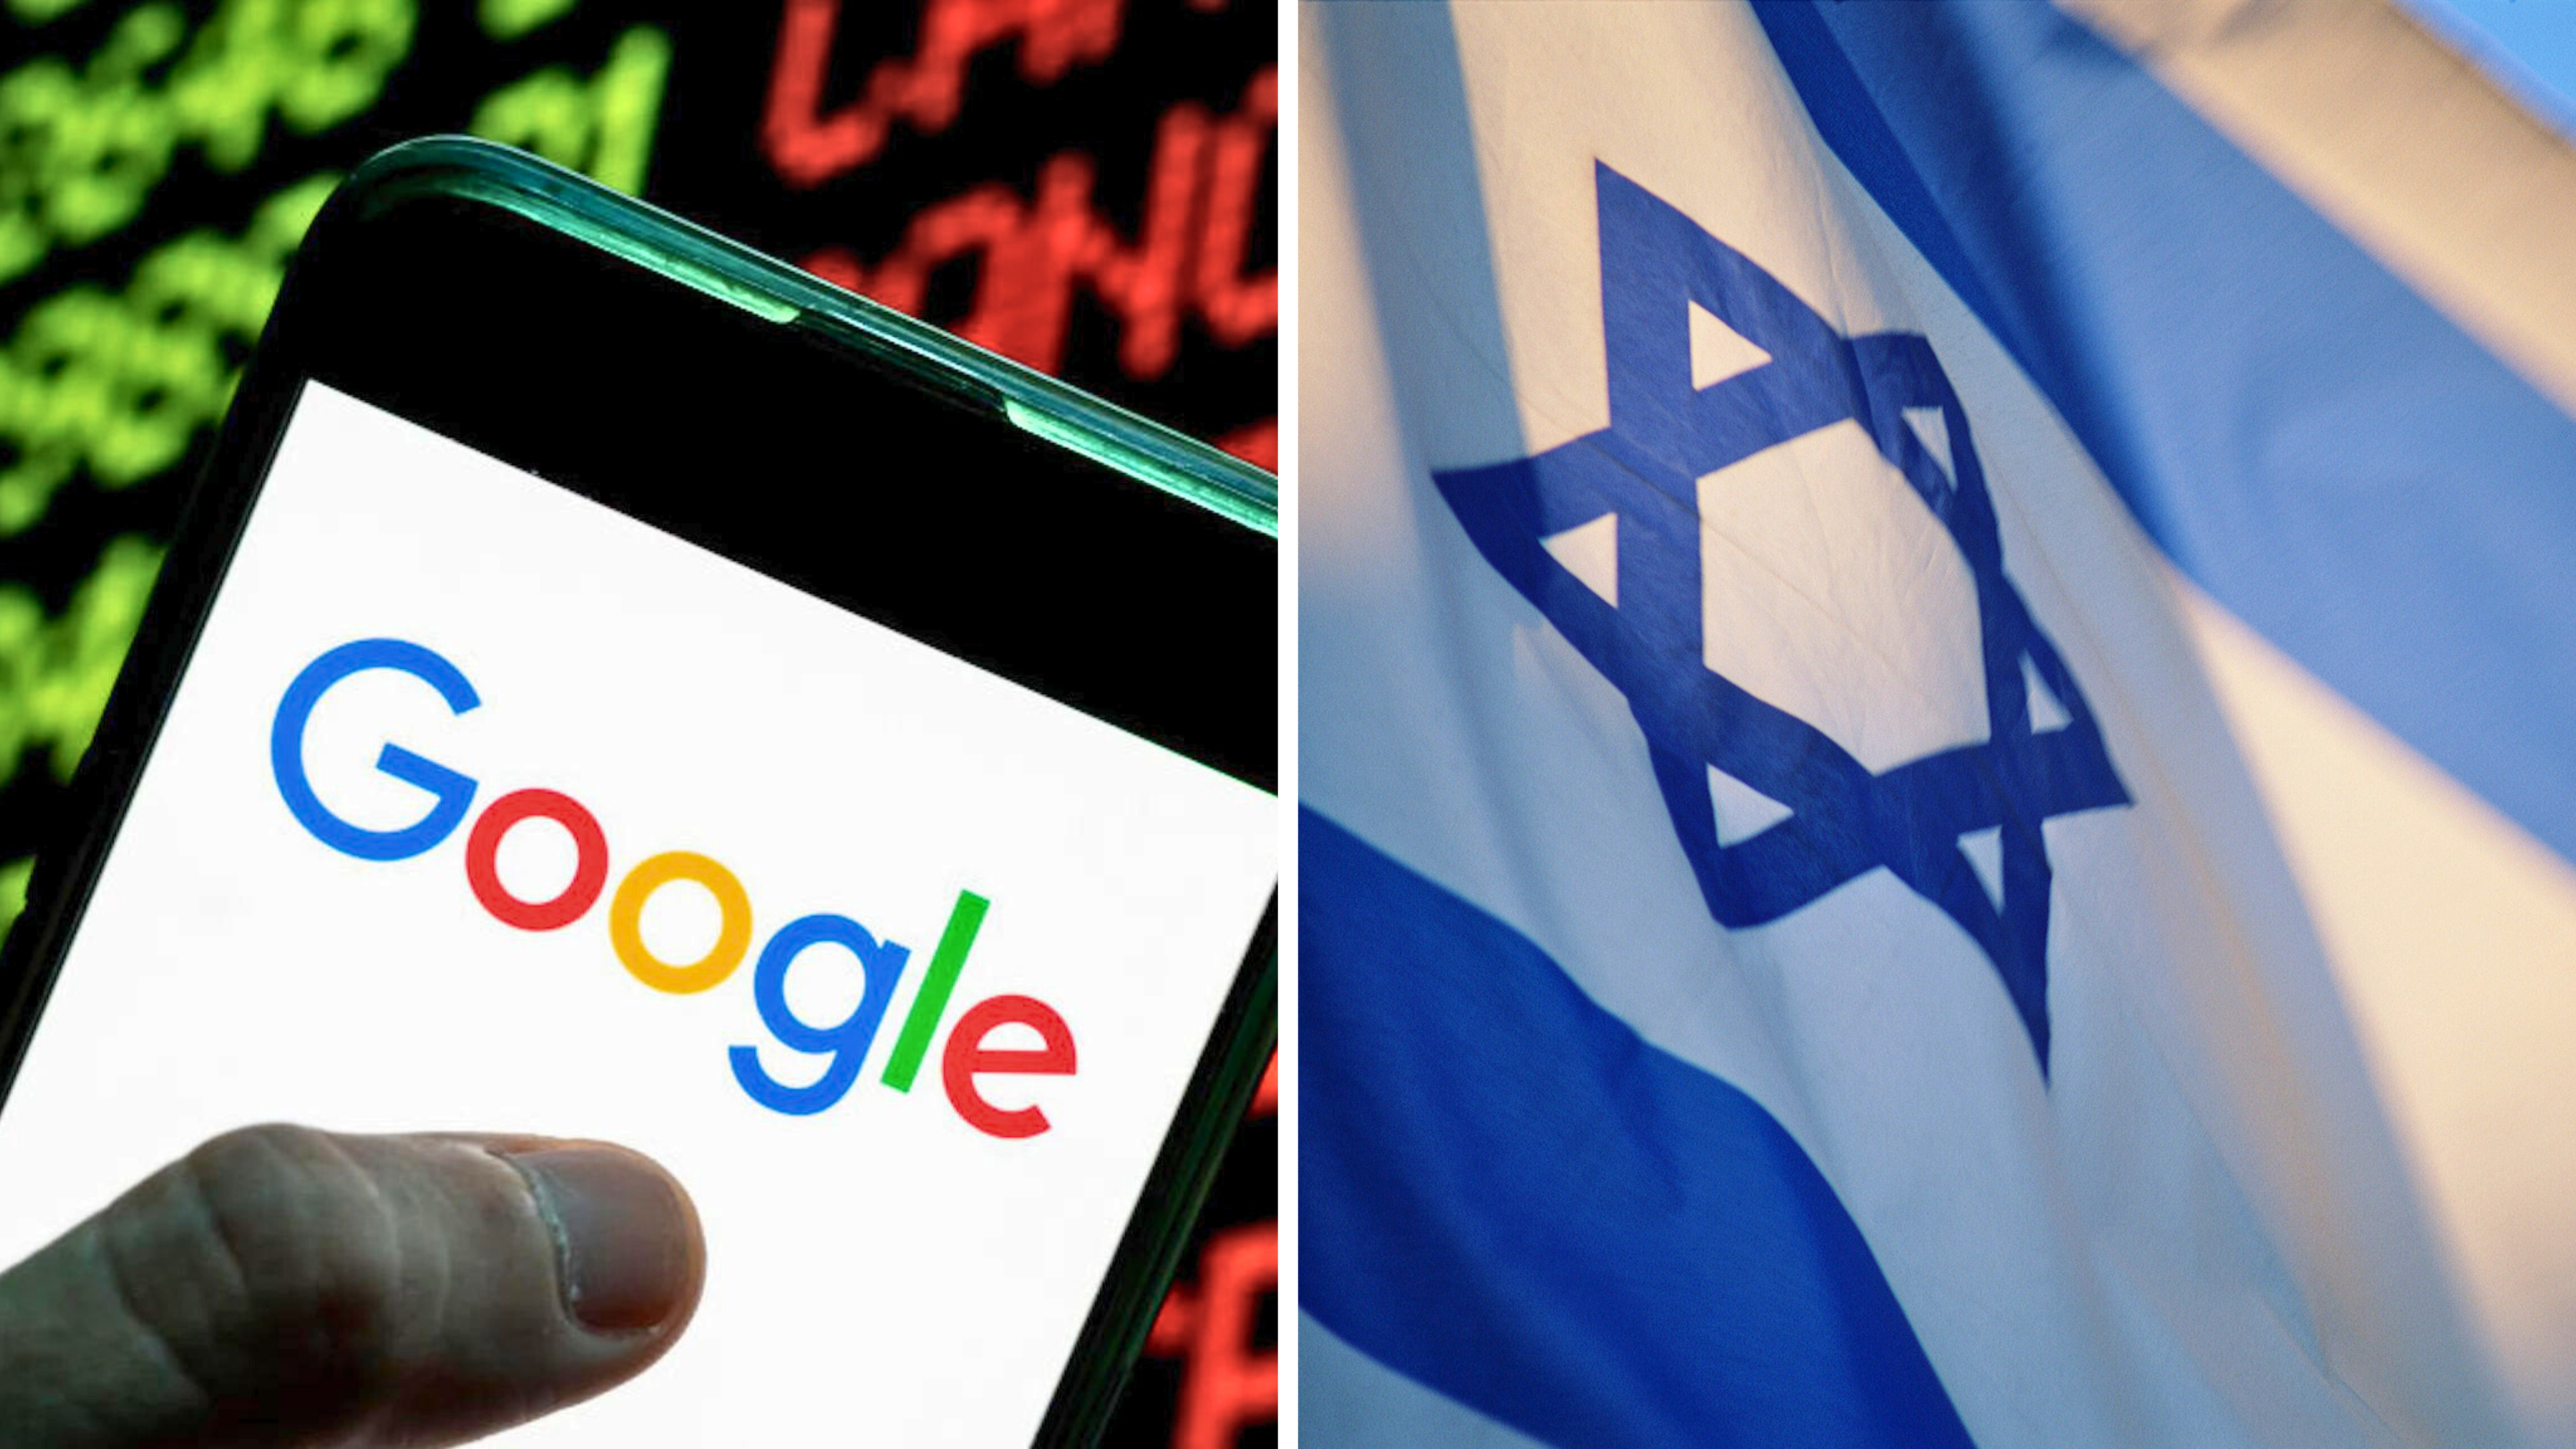 Google employees use ‘International Women’s Day’ event to criticize Israel